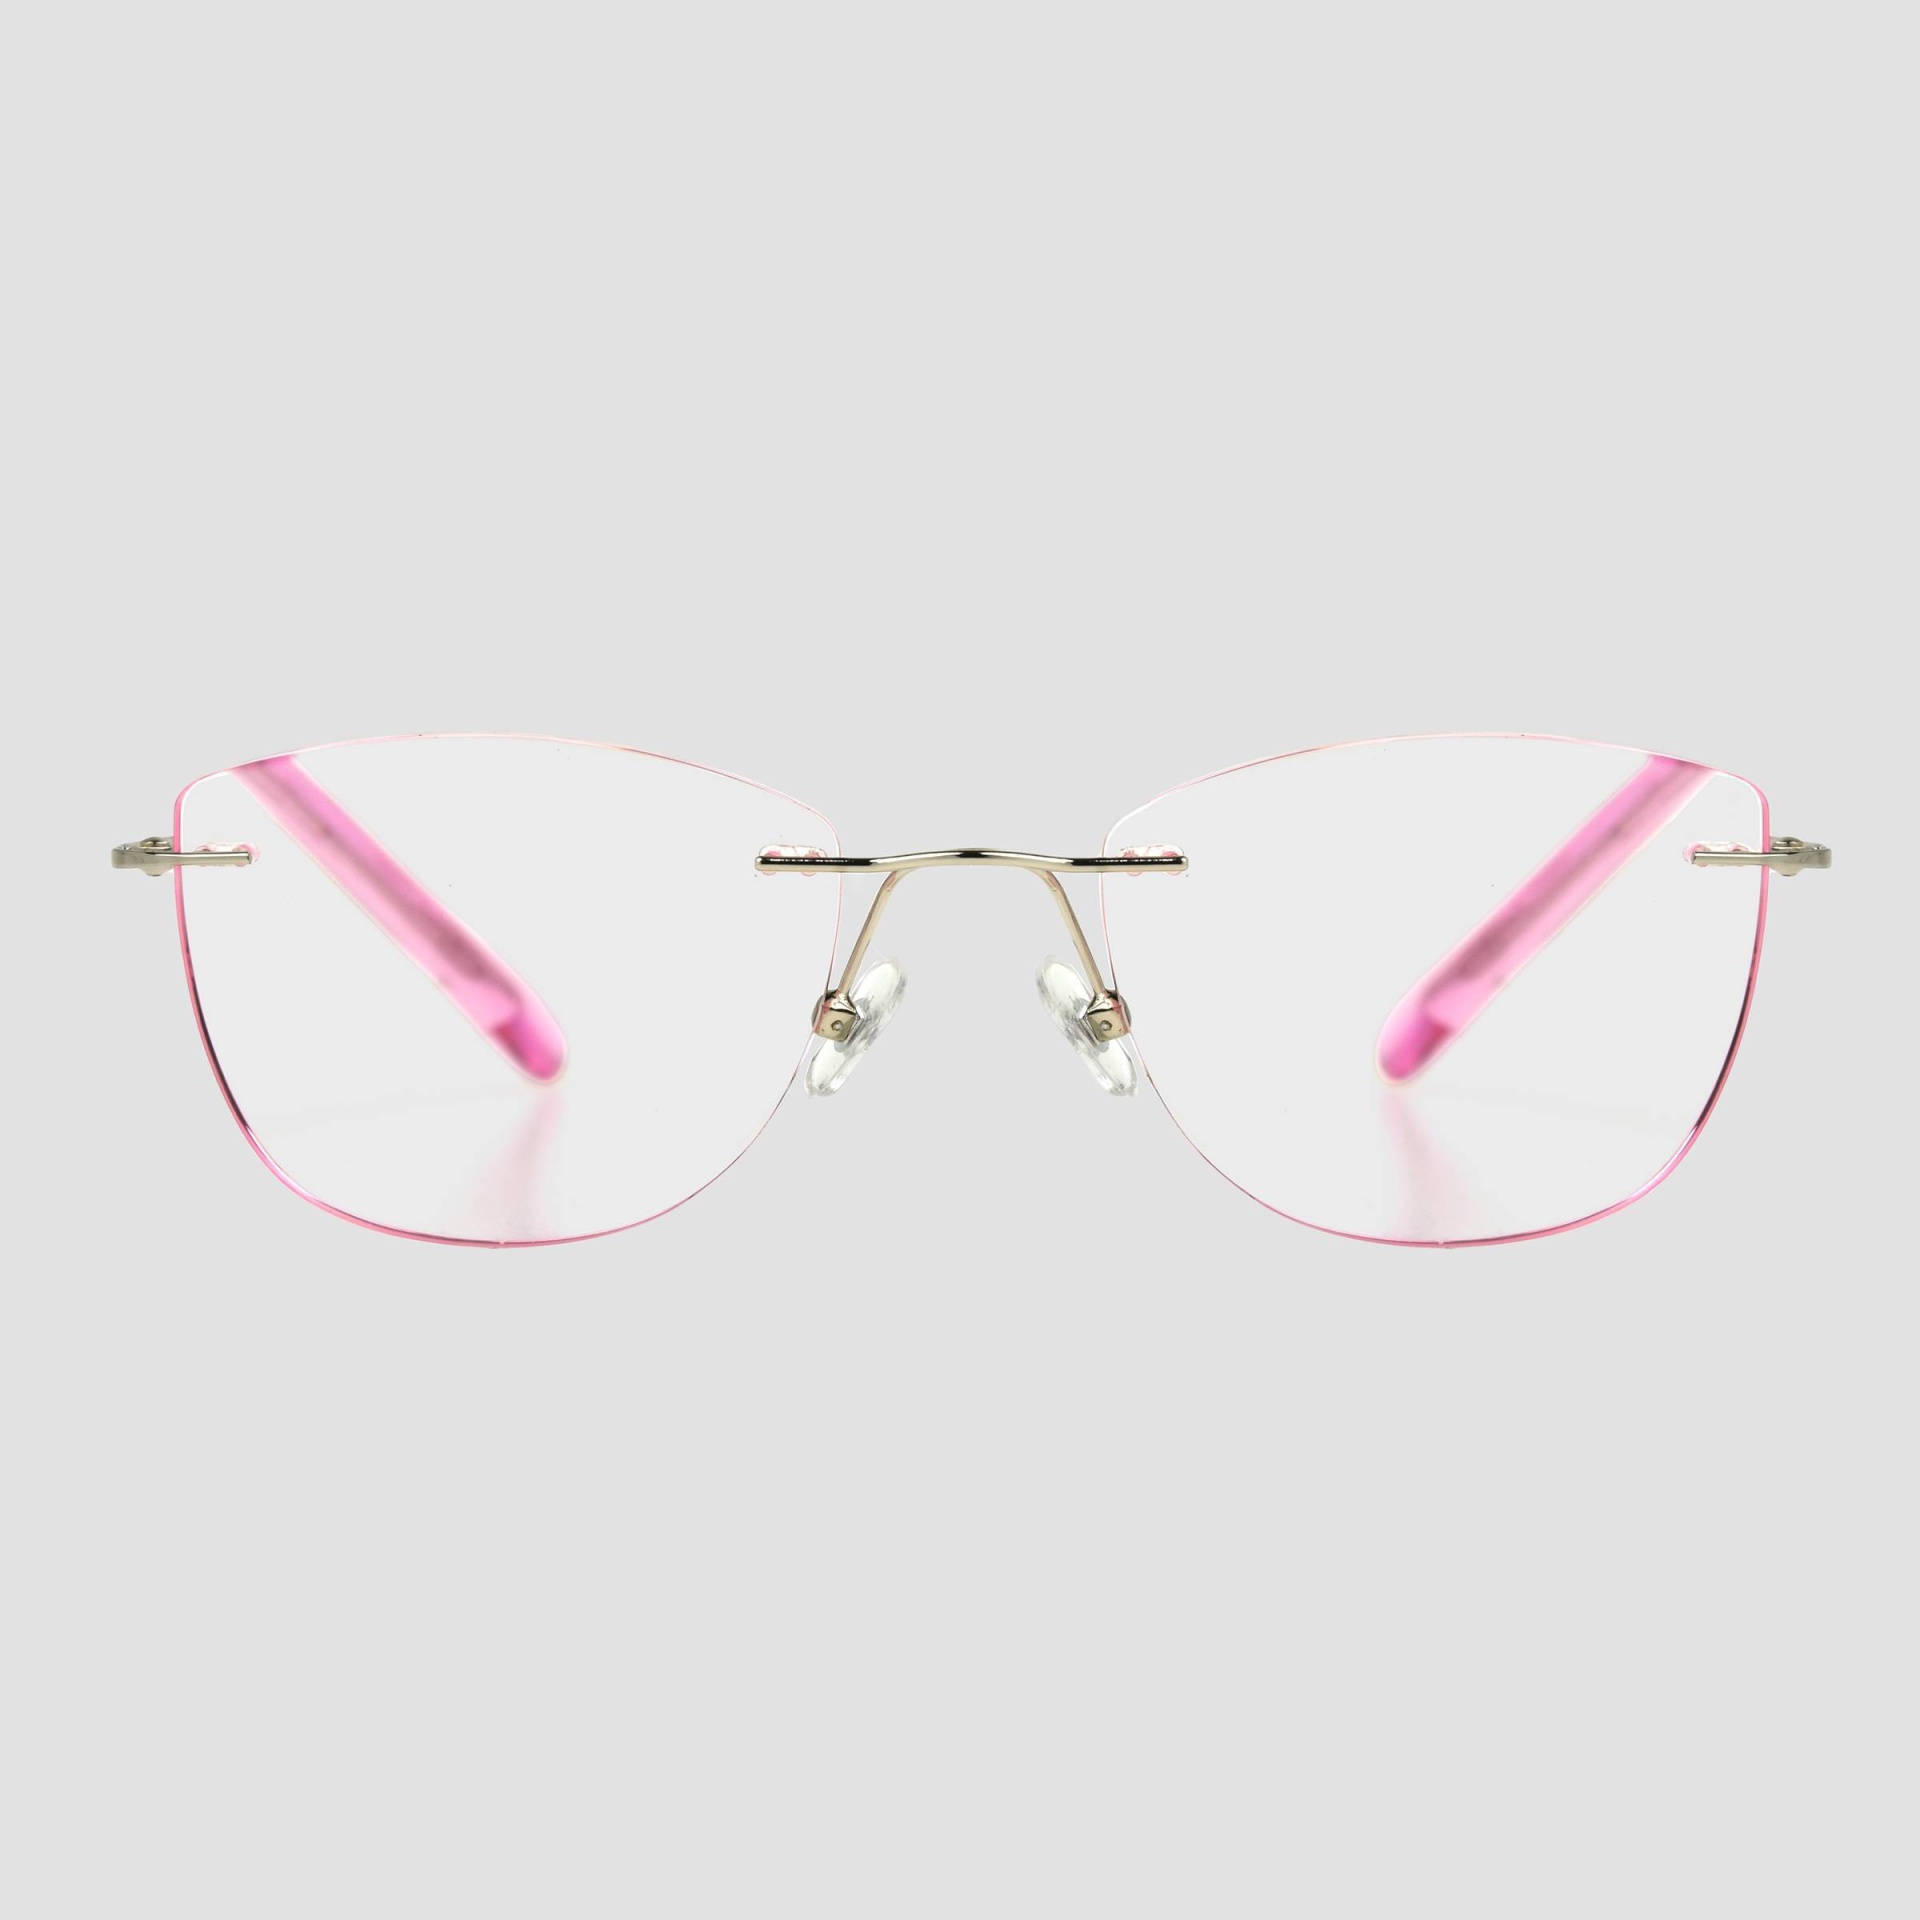 slide 1 of 3, Women's Cateye Blue Light Filtering Square Glasses - A New Day Pink, 1 ct